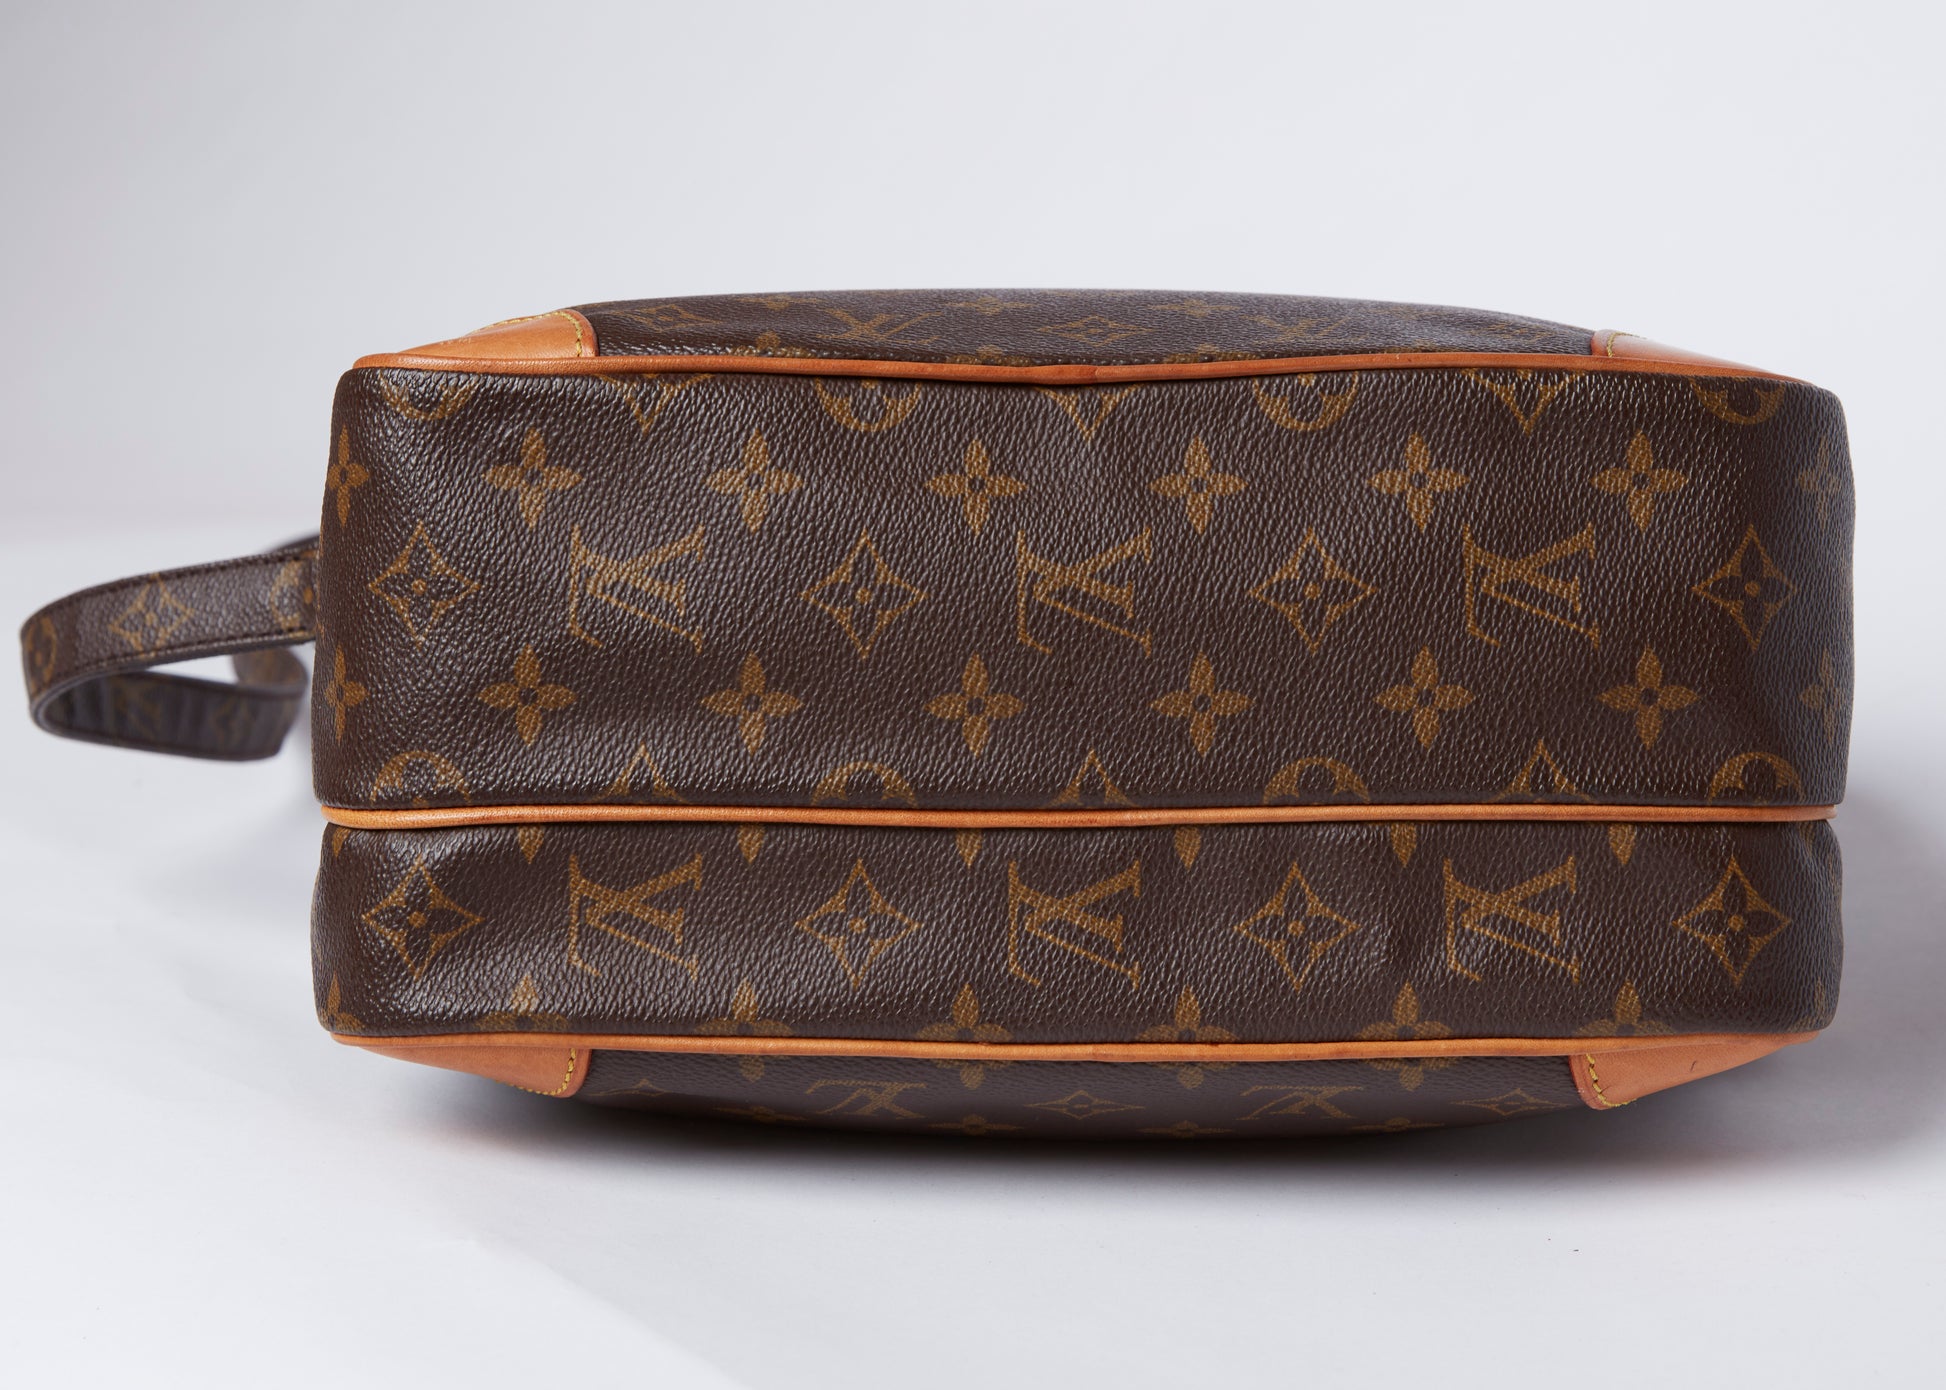 Louis Vuitton Nile Crossbody Bag Website search for DB5482 Free